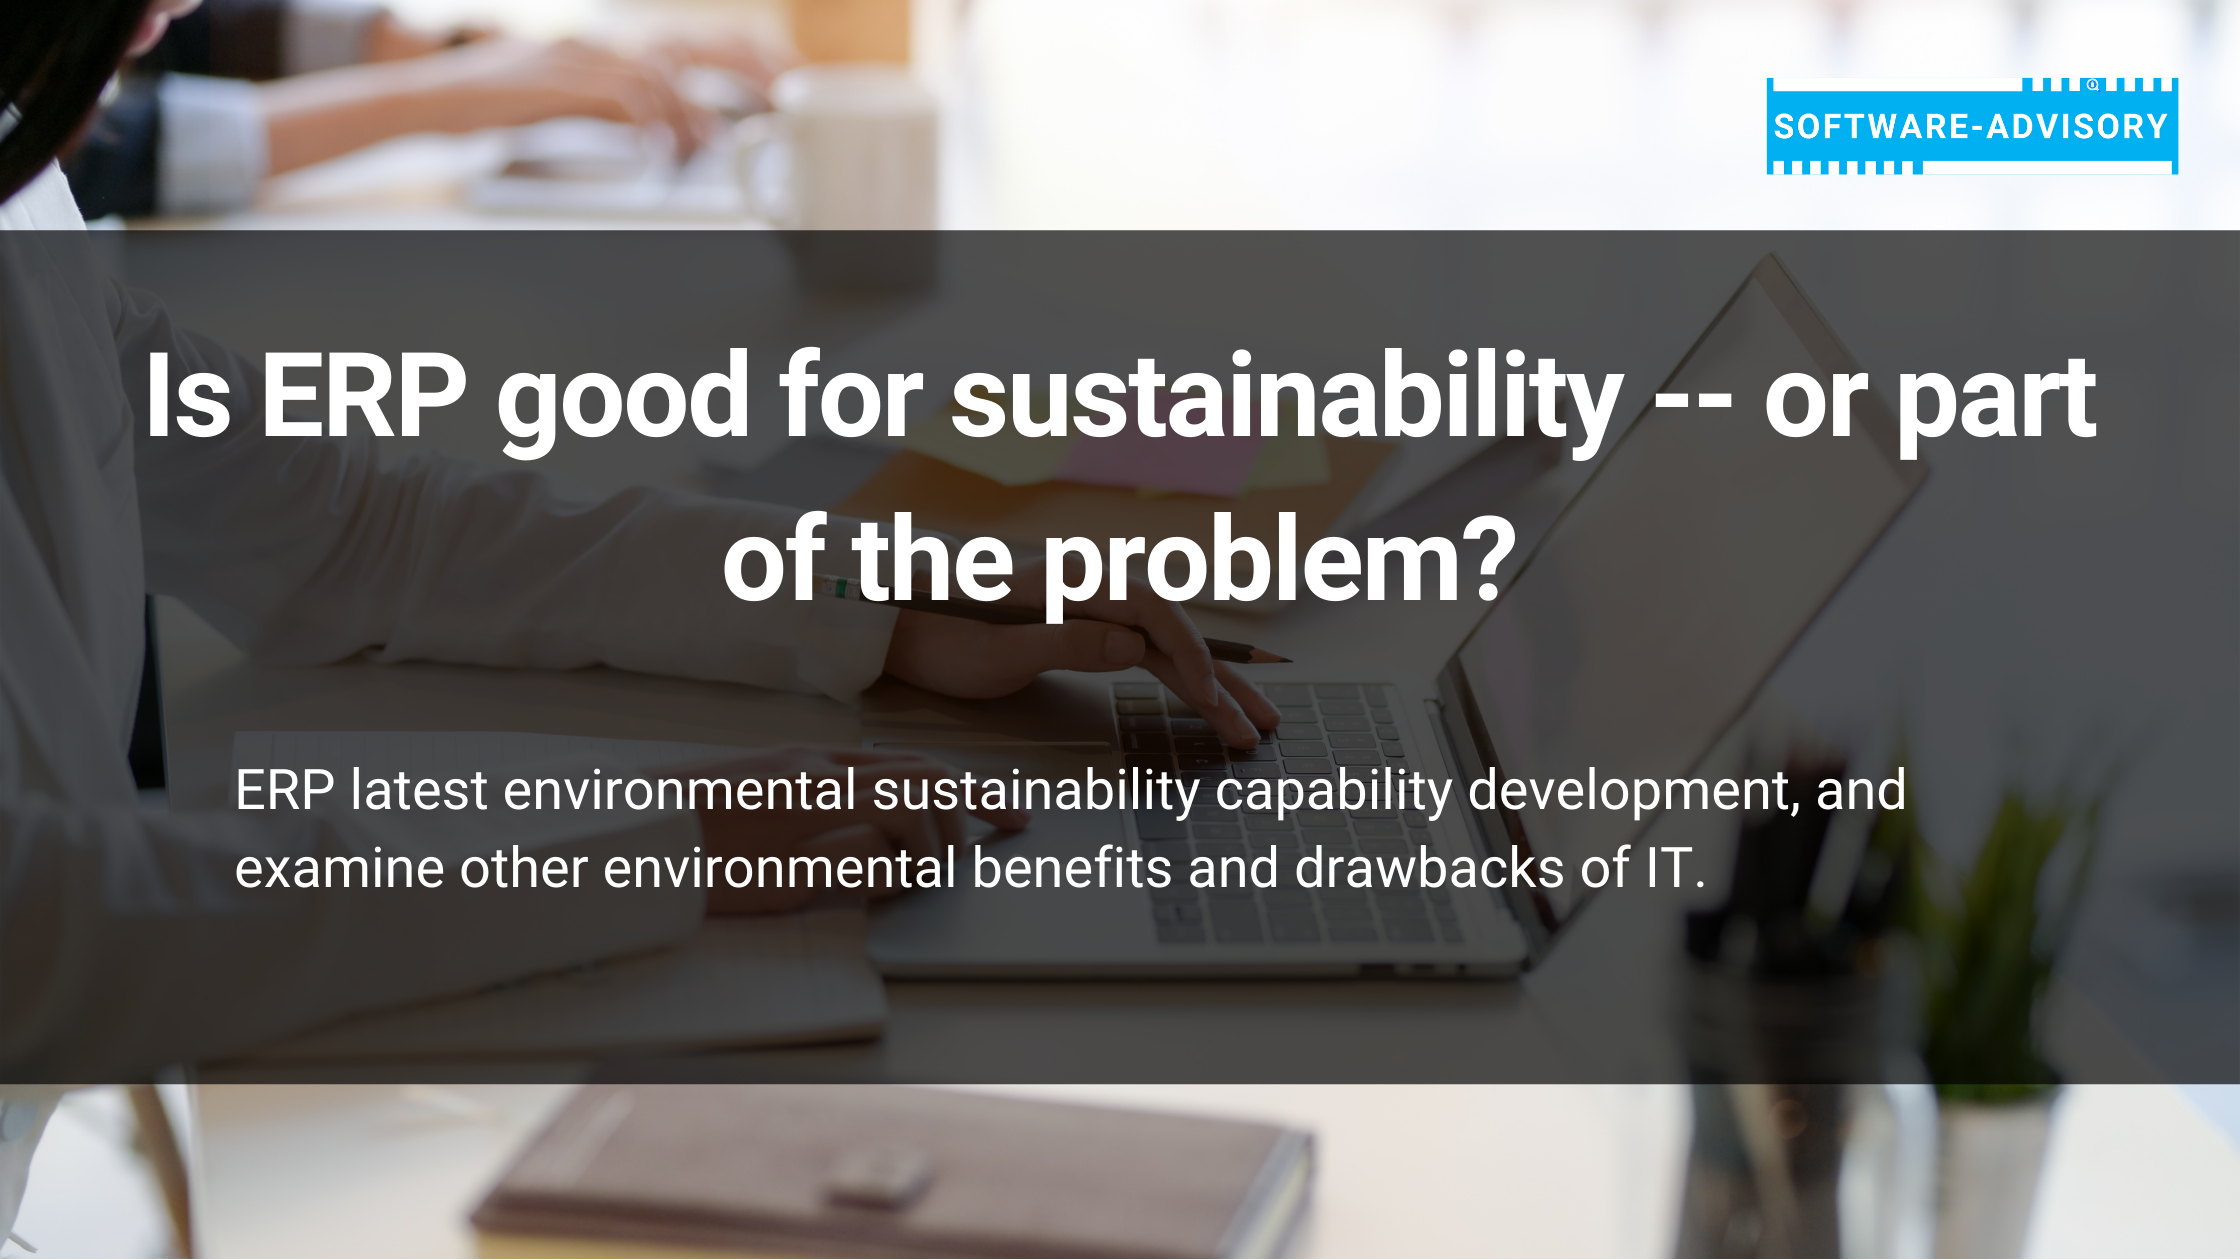 Is ERP good for sustainability -- or part of the problem?